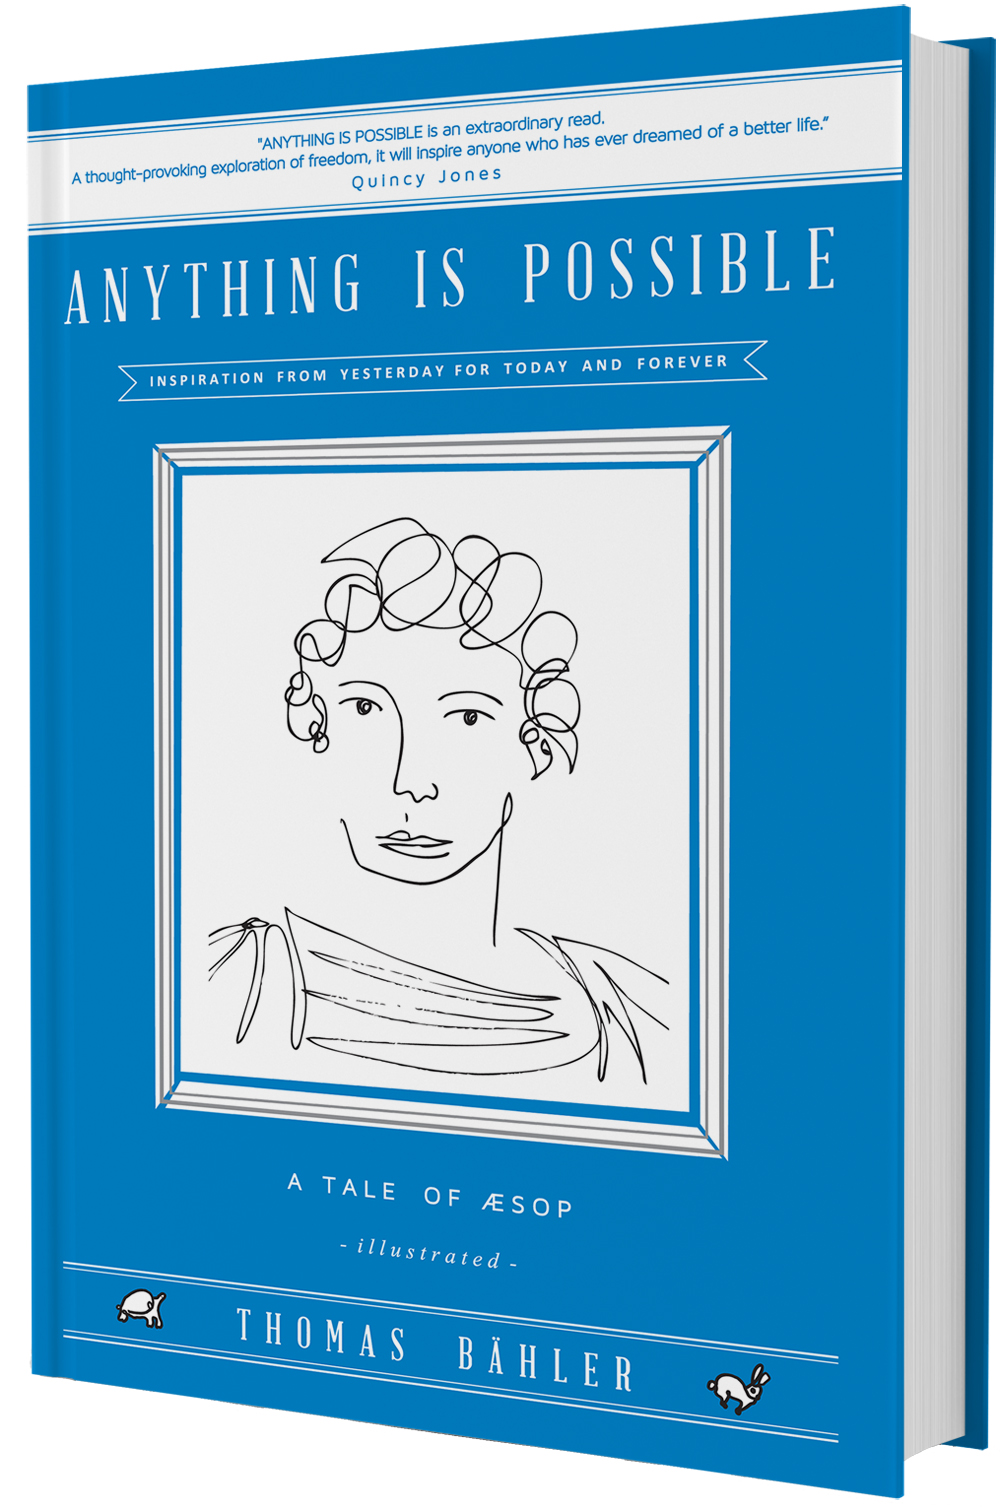 Tom Bahler Anything is Possible - Order Now